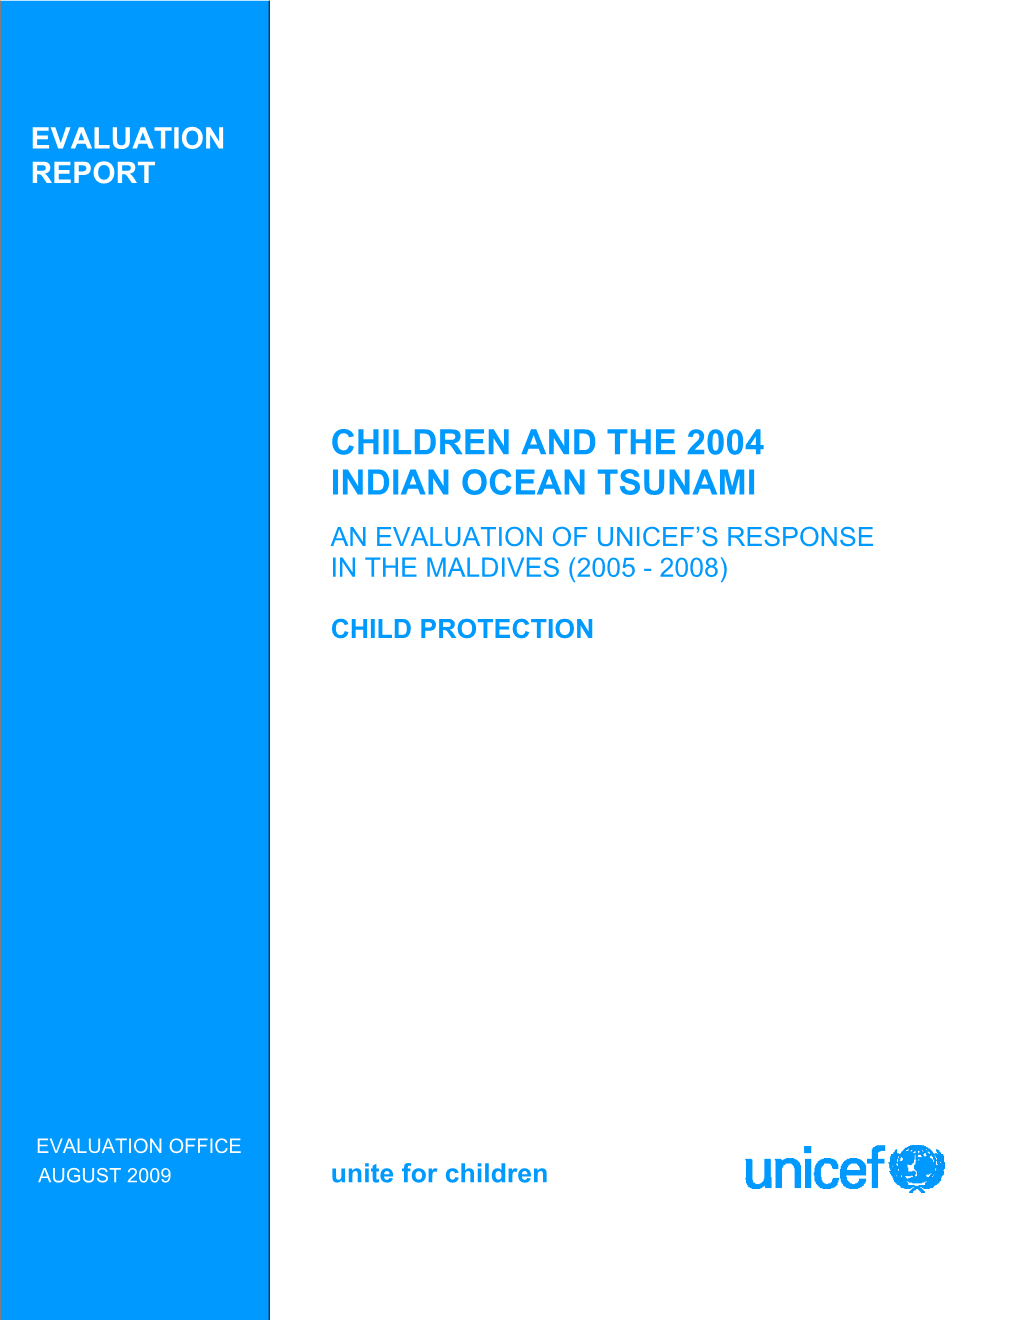 Children and the 2004 Indian Ocean Tsunami